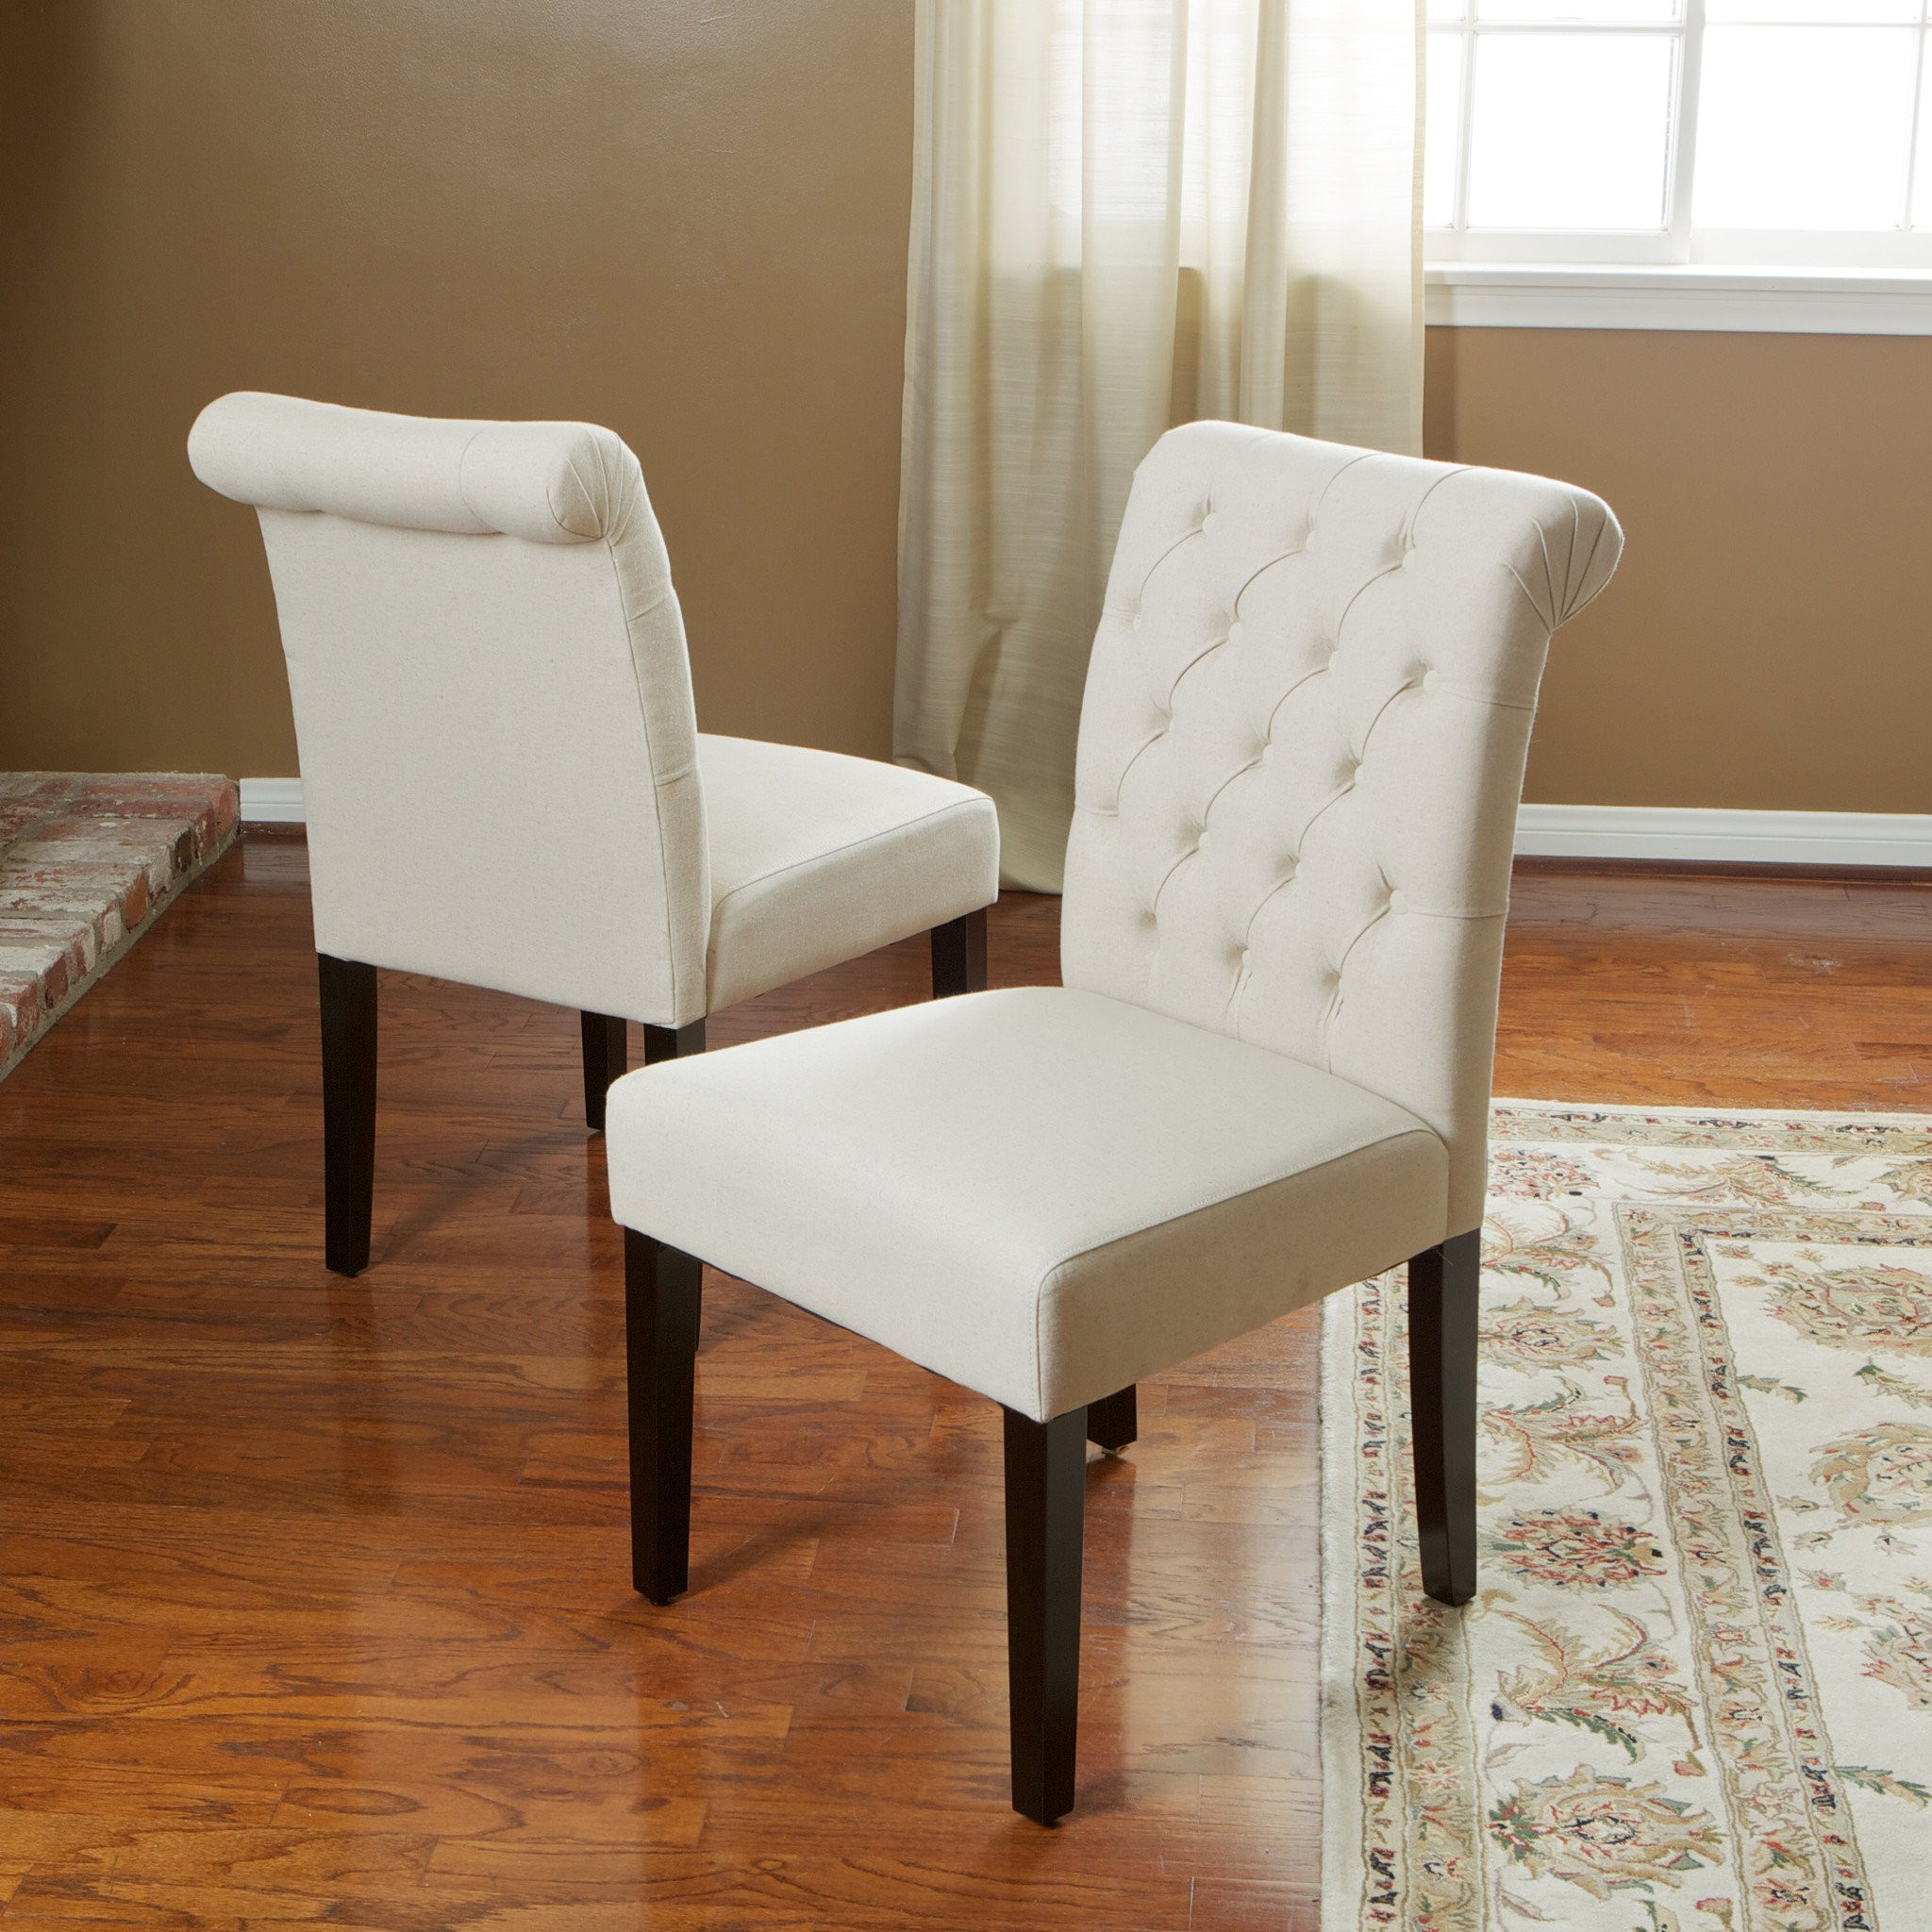 Elmerson Tufted Ivory Fabric Dining Chair (Set of...